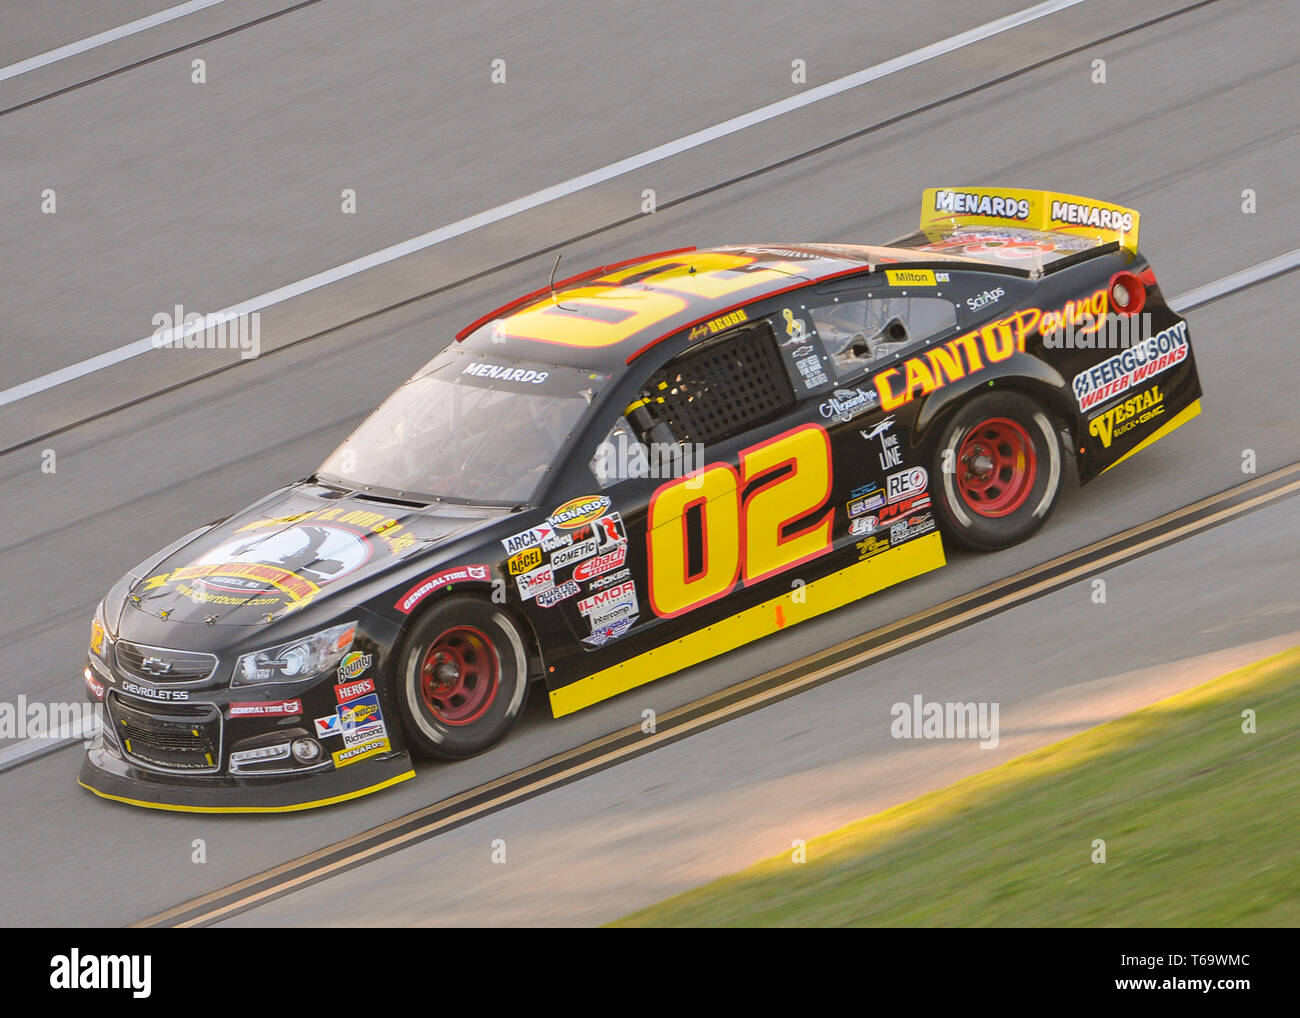 Lincoln, AL, USA. 26th Apr, 2019. The Robert B. Our Company-Canto Paving Chevrolet (02), on the track during the General Tire 200 at Talladega Super Speedway in Lincoln, AL. Kevin Langley/Sports South Media/CSM/Alamy Live News Stock Photo